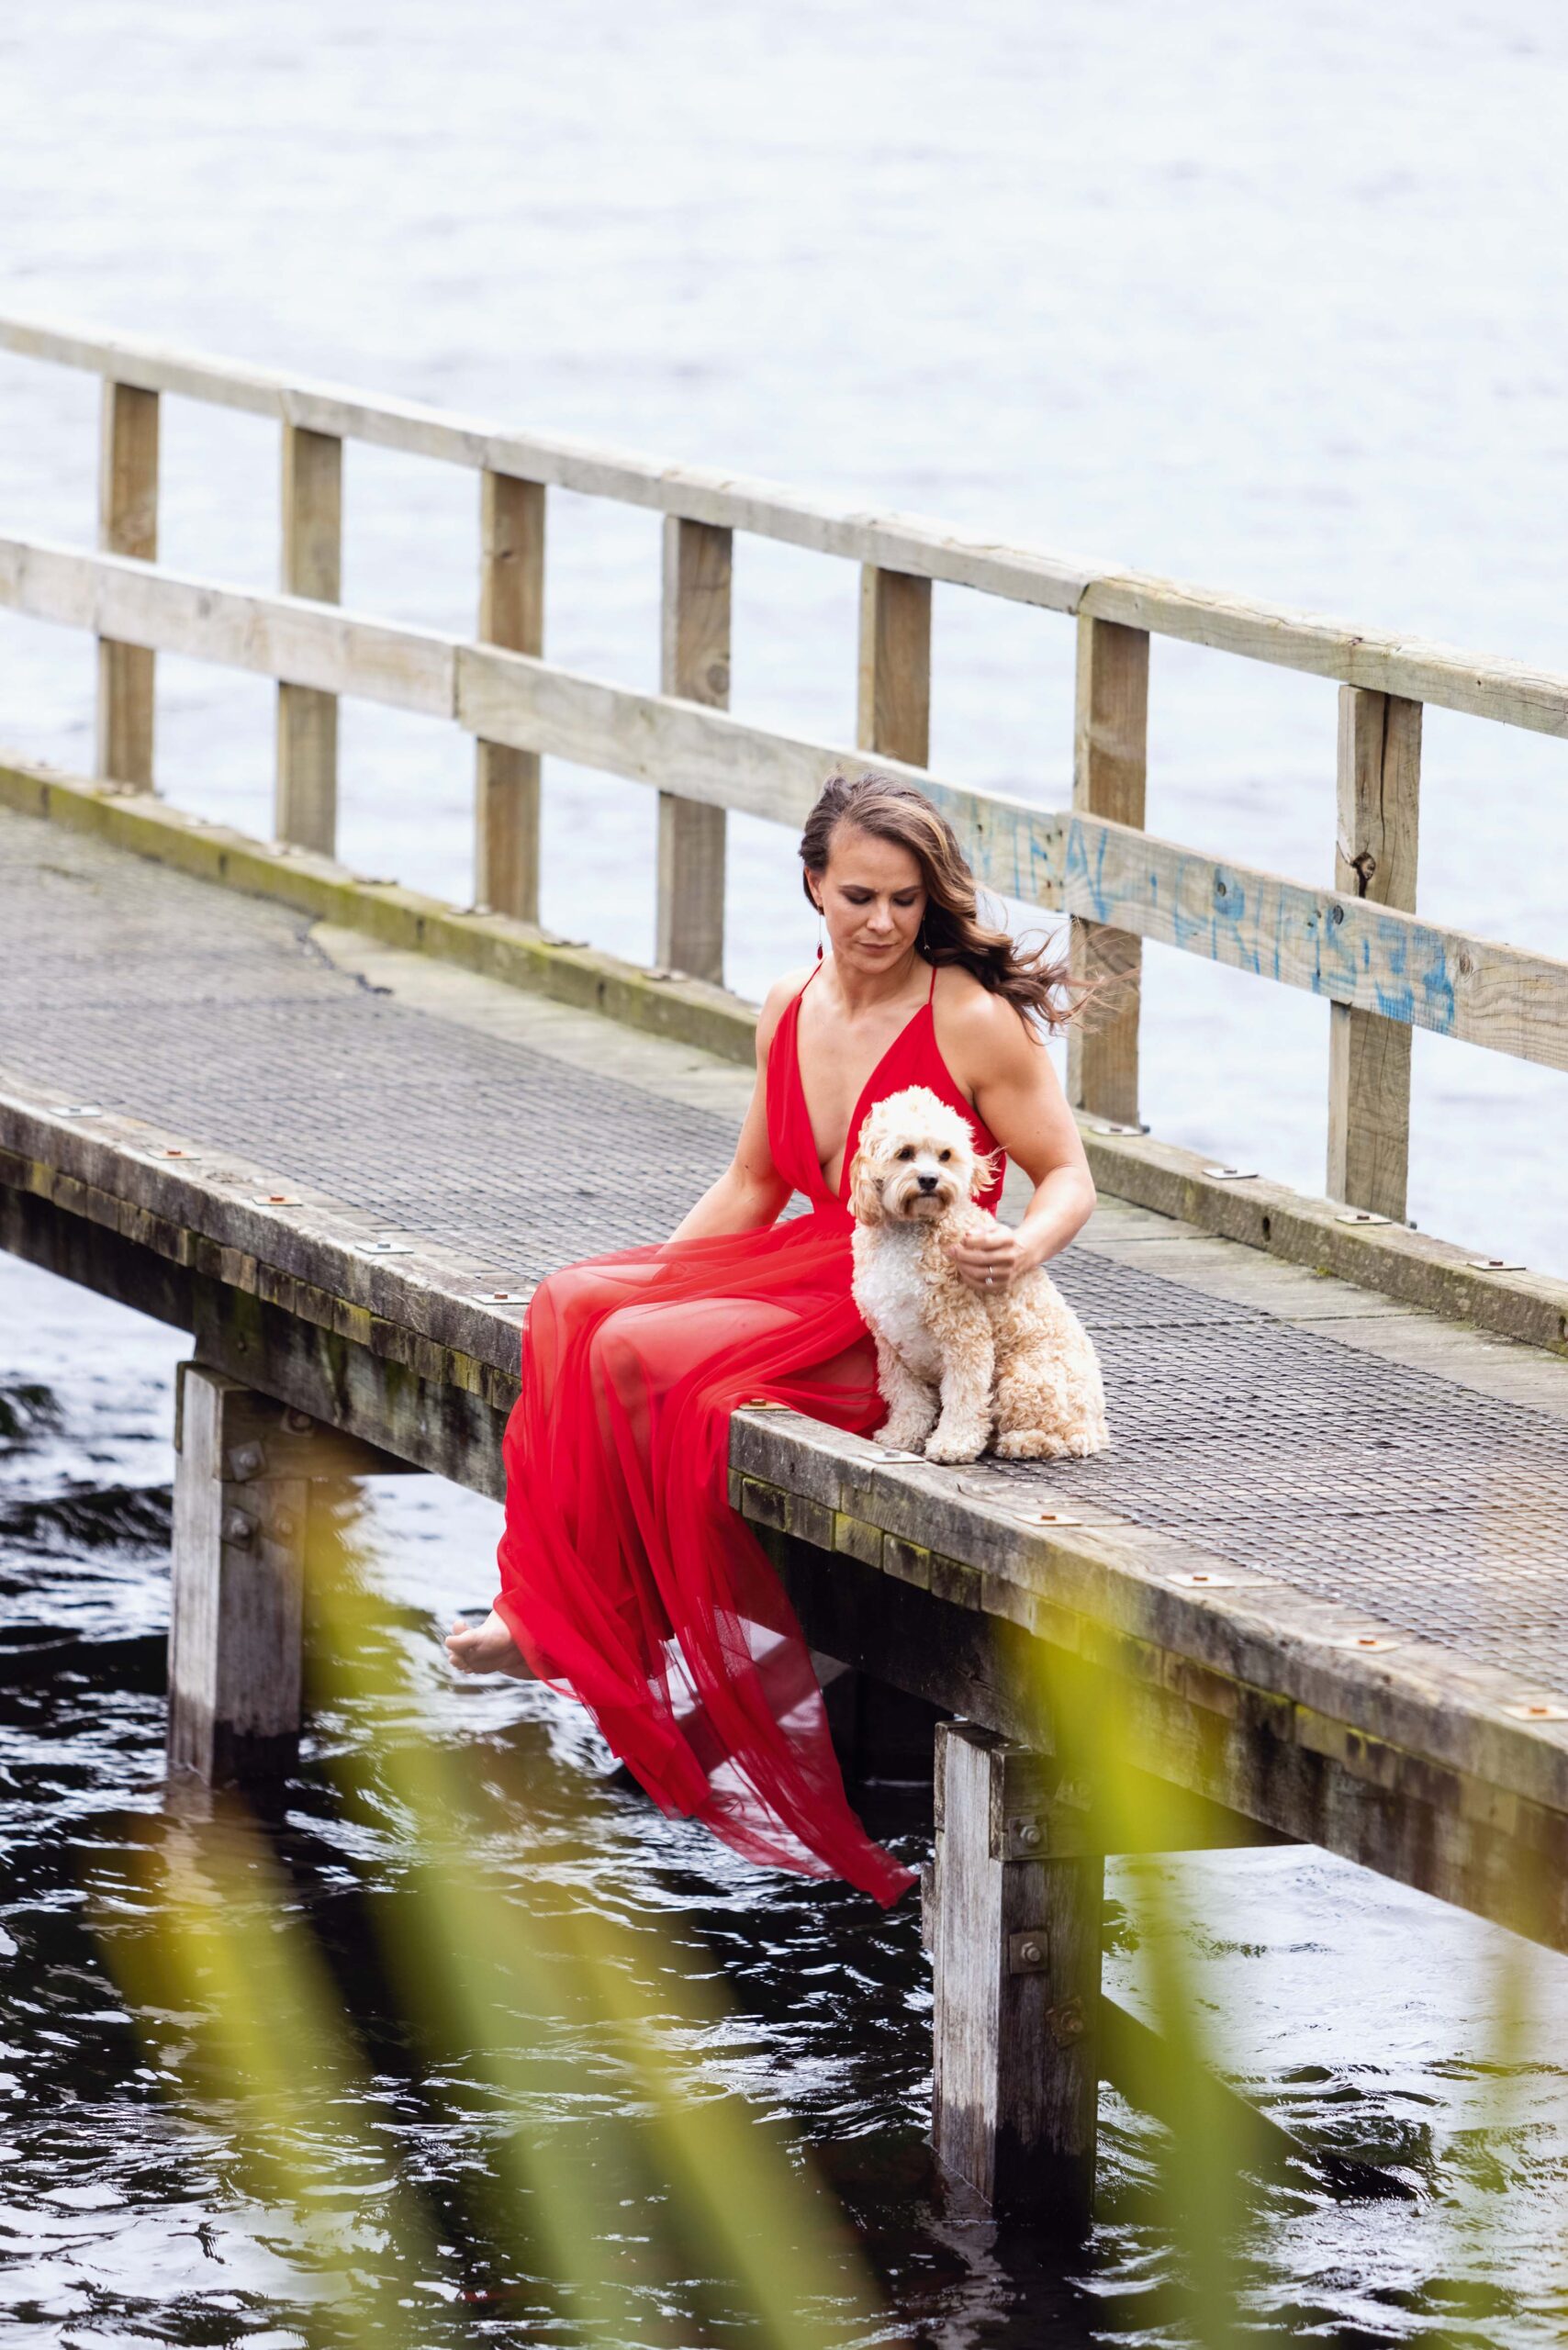 Lisa Carrington in a red dress sitting on a pier with her dog